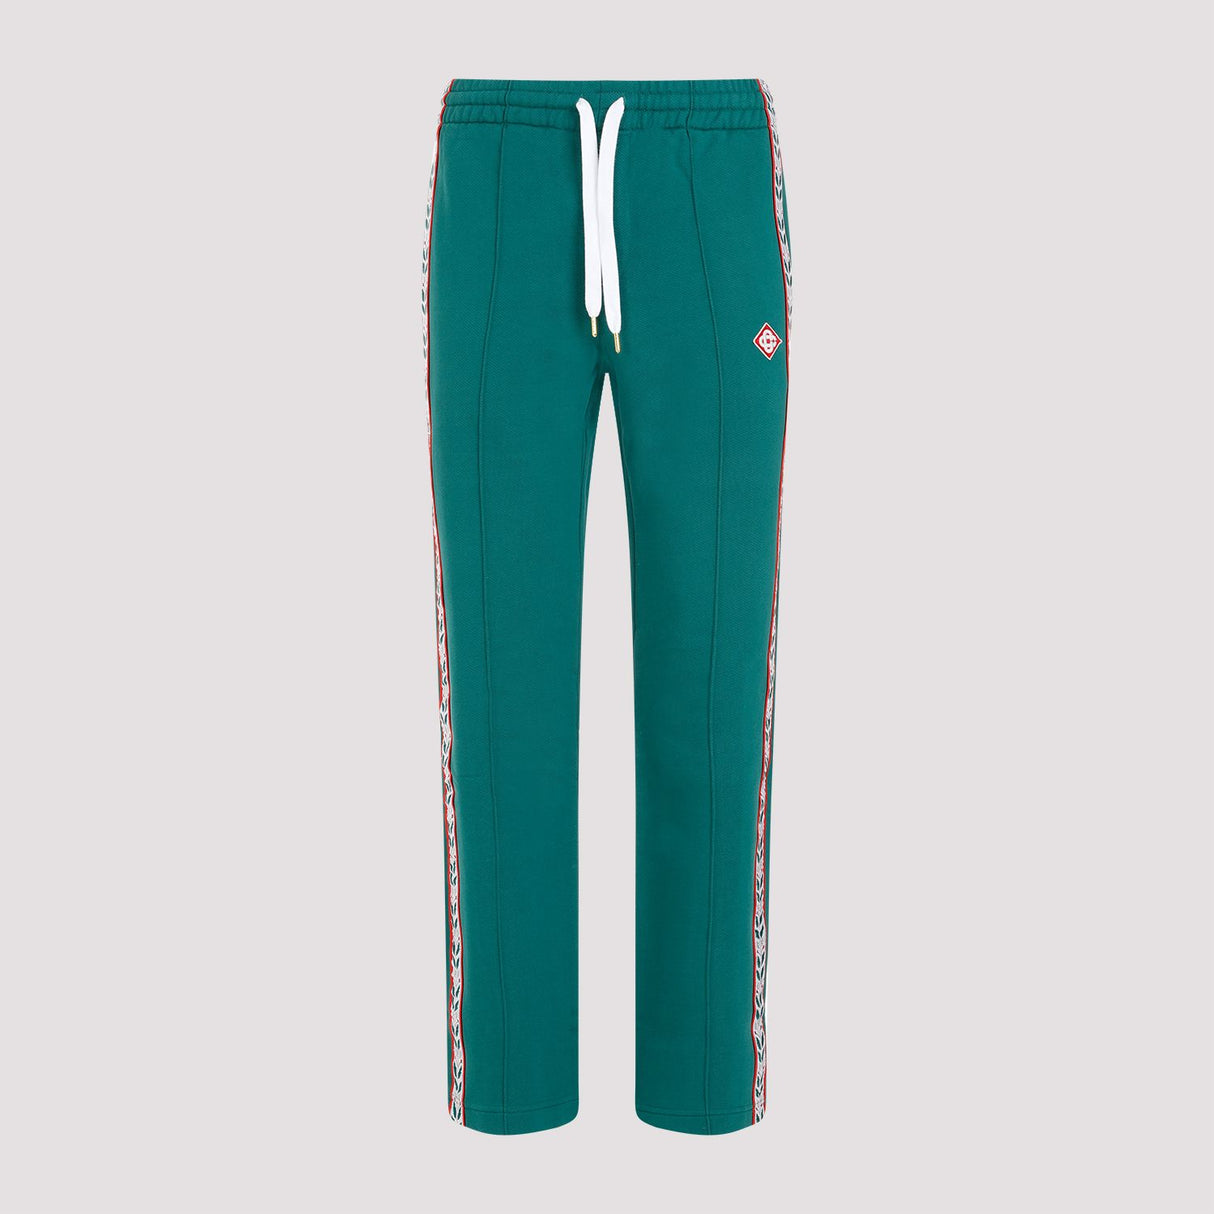 CASABLANCA Green Tapered Joggers for Men - 100% Organic Cotton